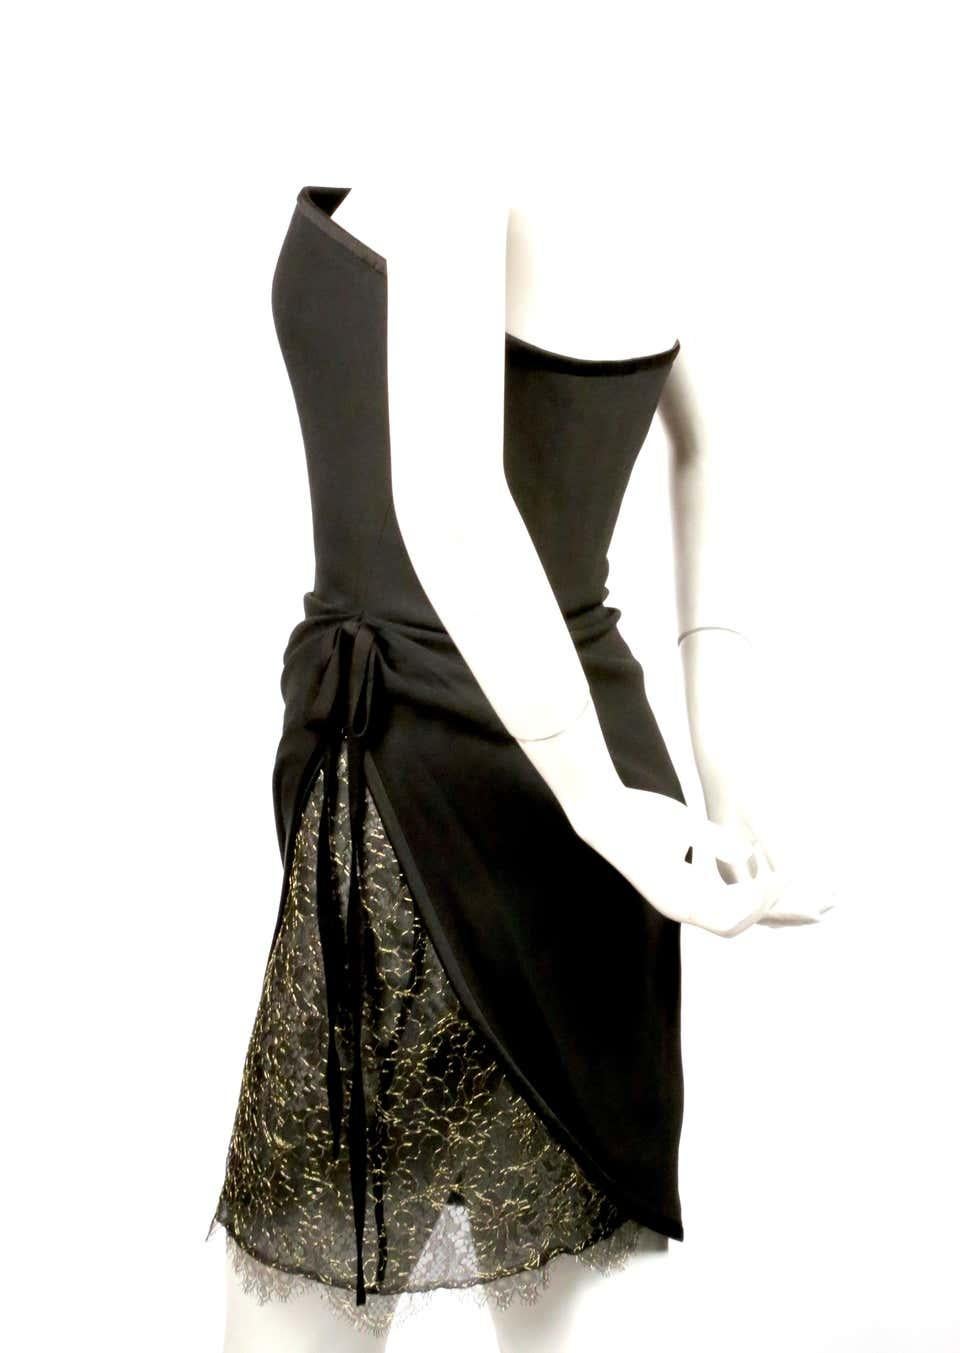 Jet-black, strapless dress with asymmetrical draping and lace accent designed by Yves Saint Laurent dating to the early 1990's. Labeled a French size 38. Dress best fits a US 2 or slim 4. Approximate measurements: bust 33